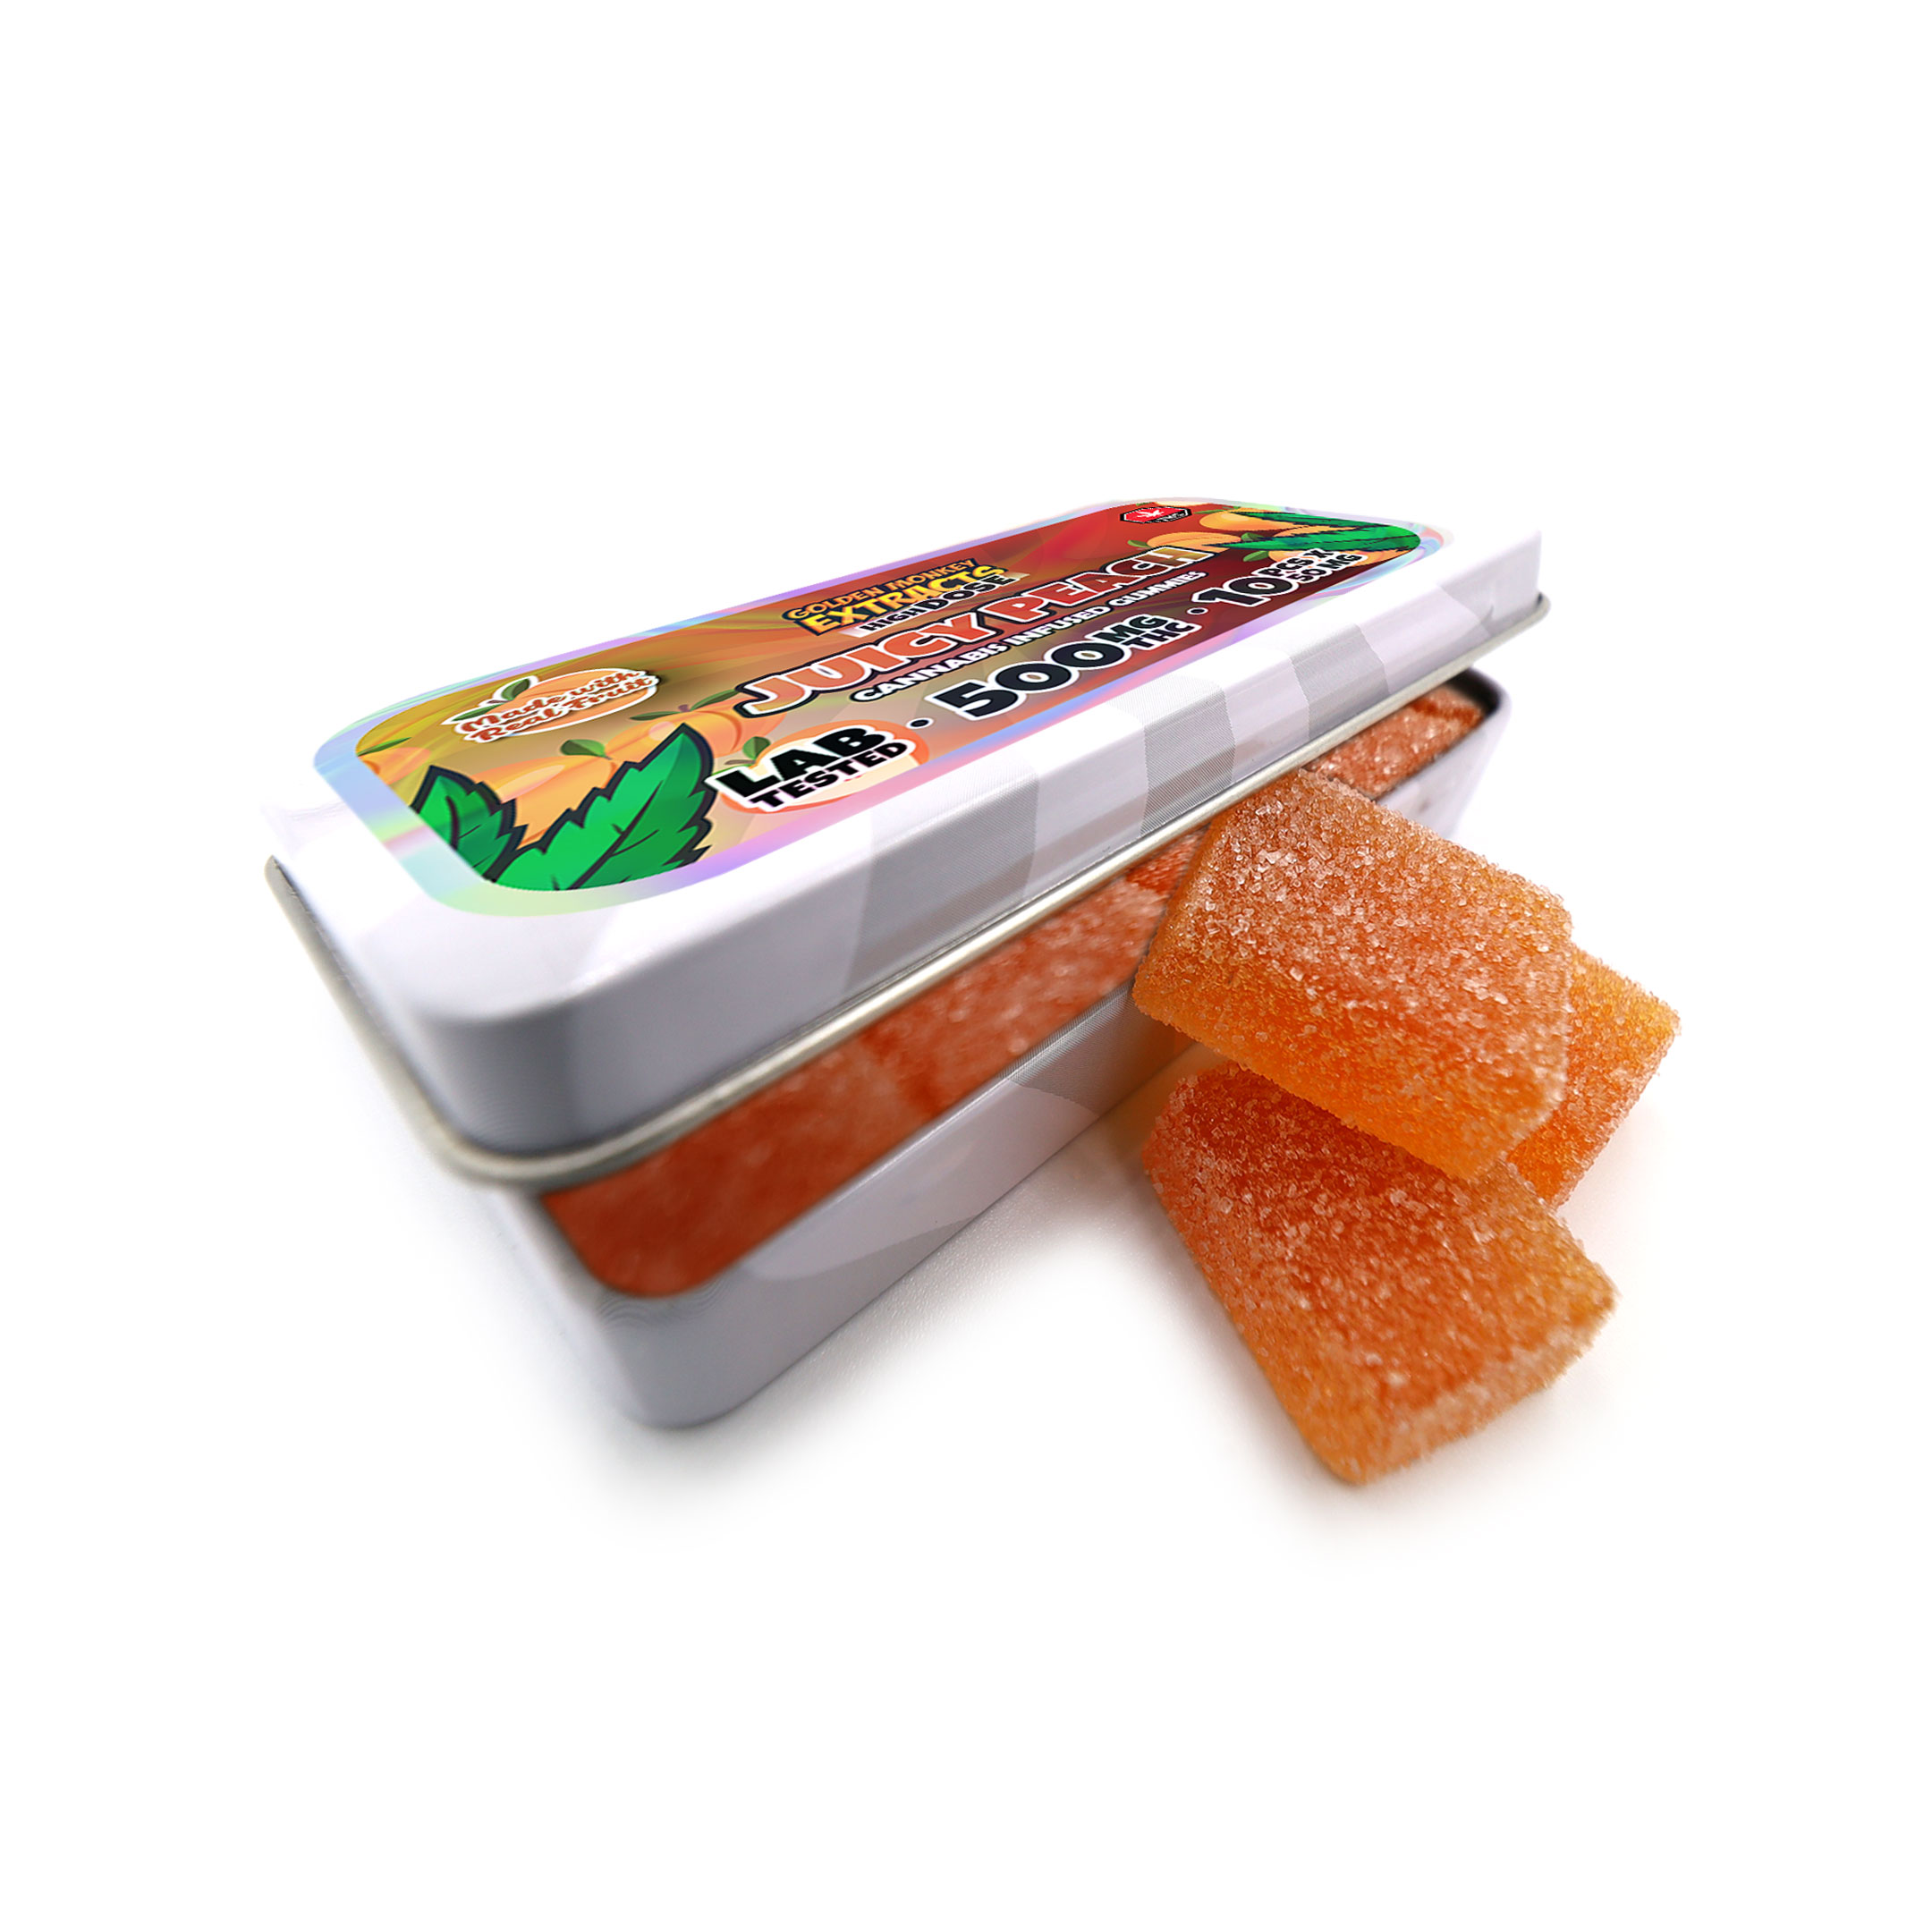 Golden Monkey Extracts - THC Gummy High Dose Juicy Peach - 1000MG| Buy Edibles Online | Dispensary Near Me